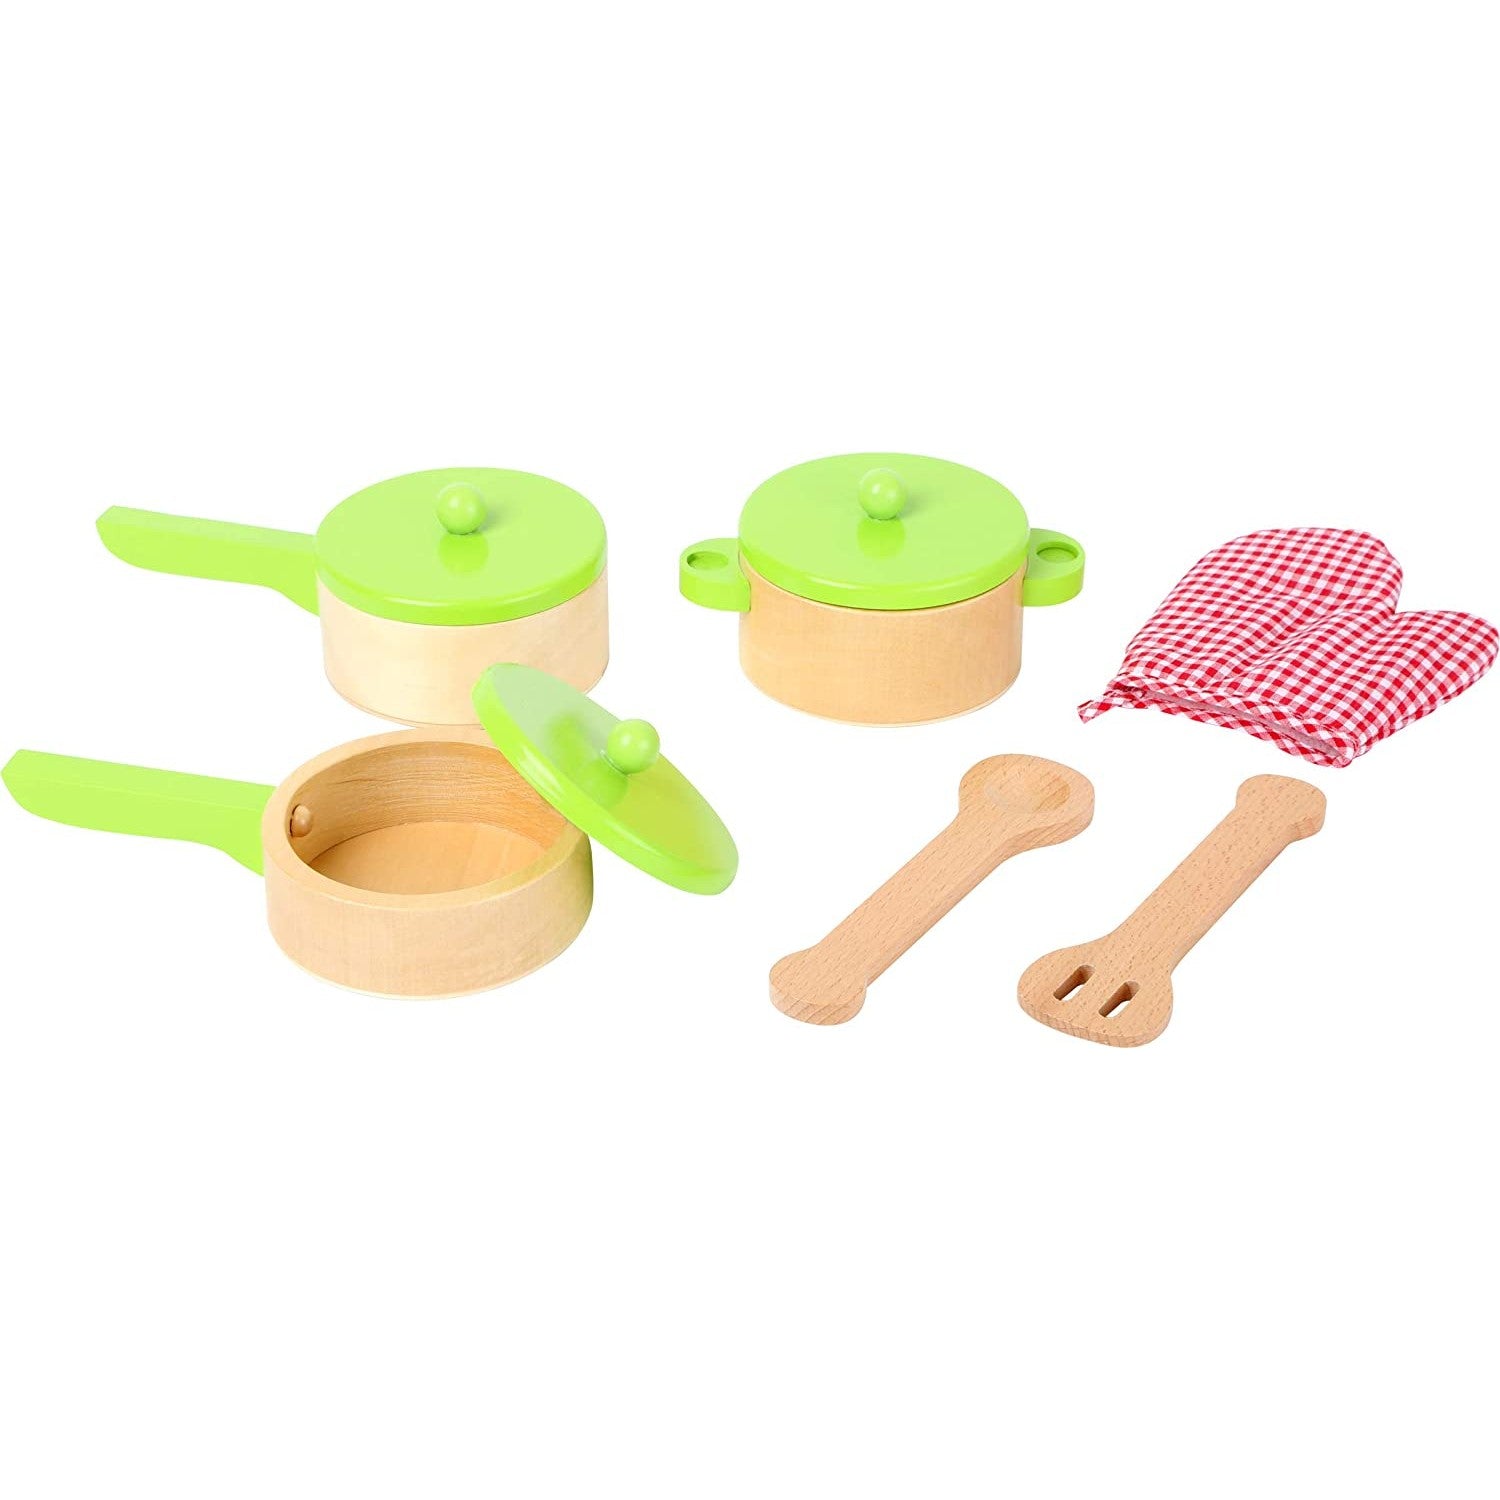 Cooking Set for Play Kitchens